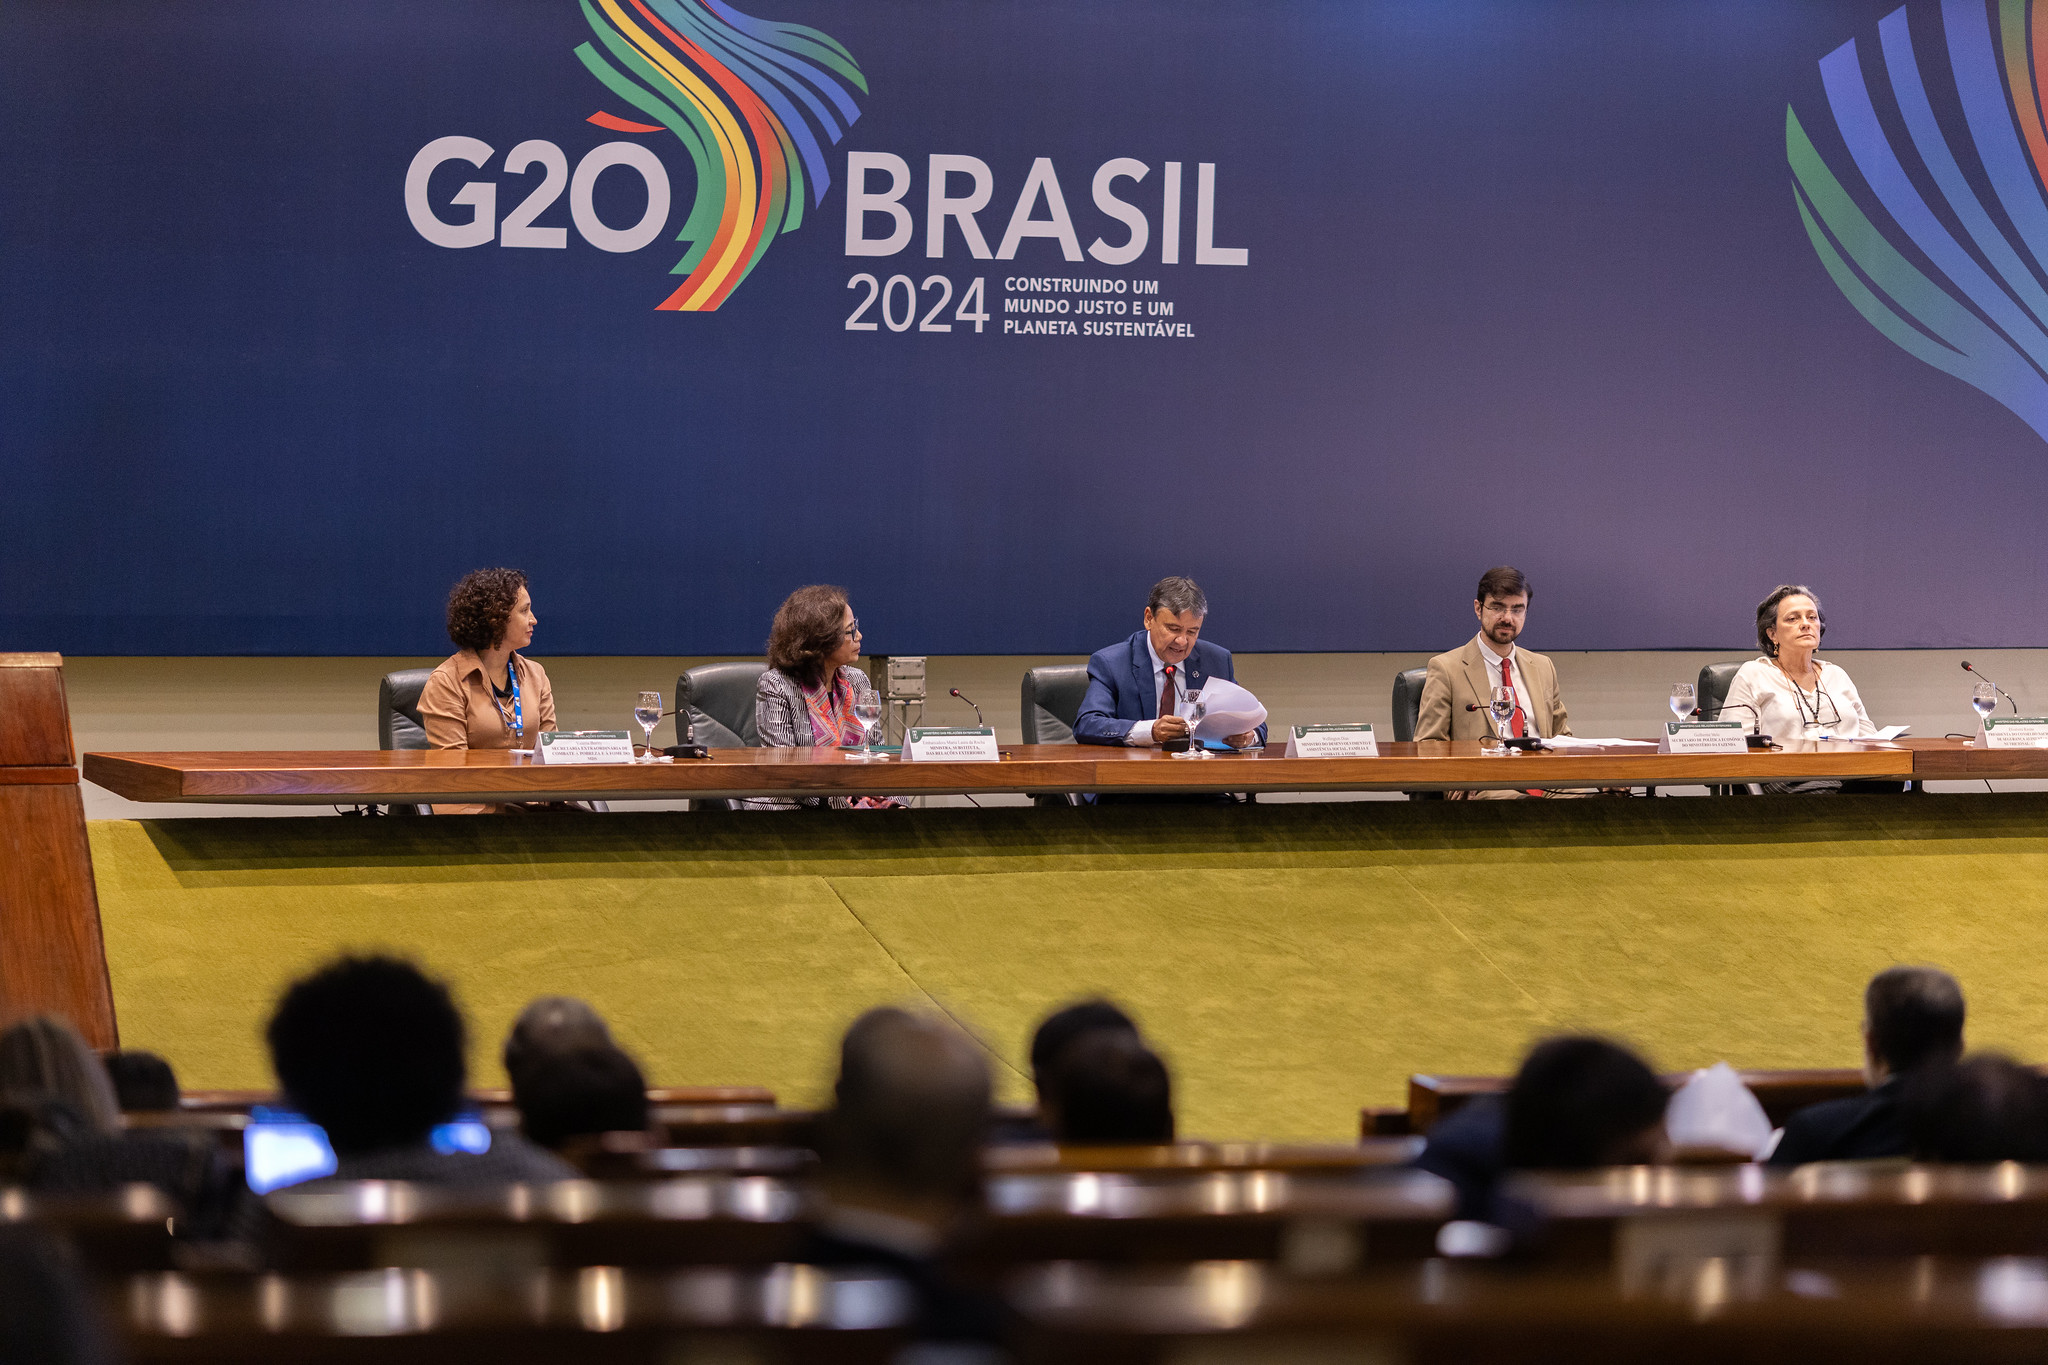 Face-to-face meeting of the Global Alliance against Hunger and Poverty, held in Brasilia, with delegates from the G20 countries. Photo: Audiovisual/G20